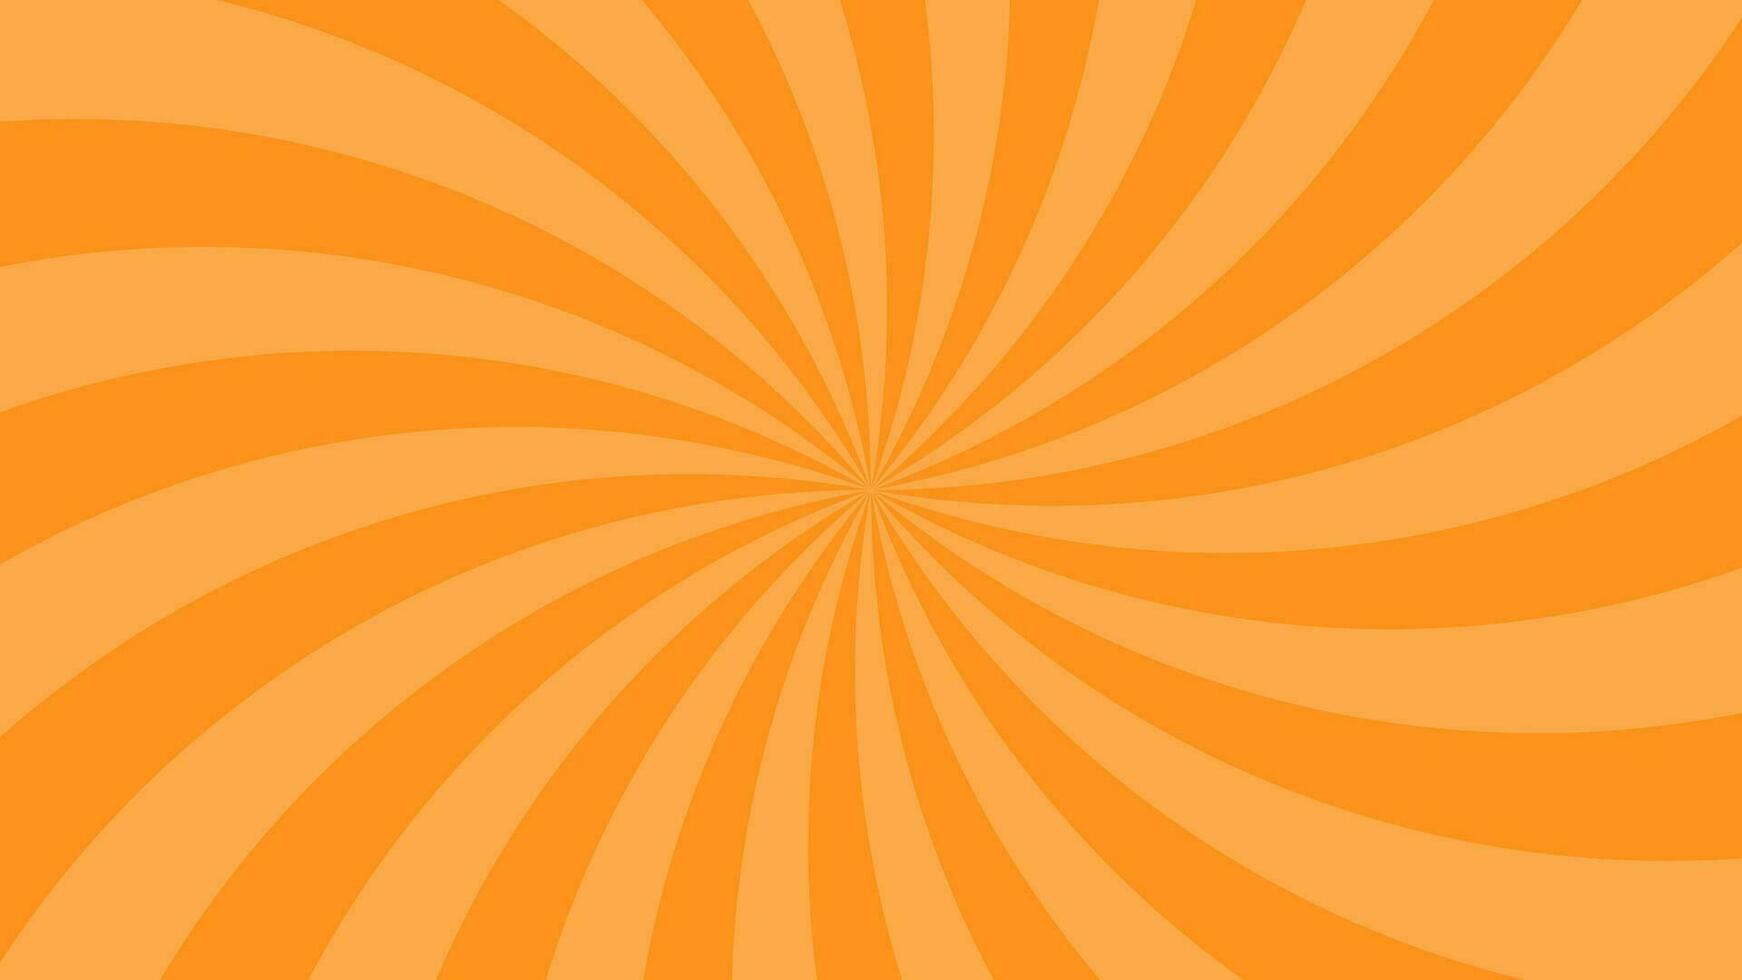 Simple Light Orange Curved Radial Lines Effect Vector Background